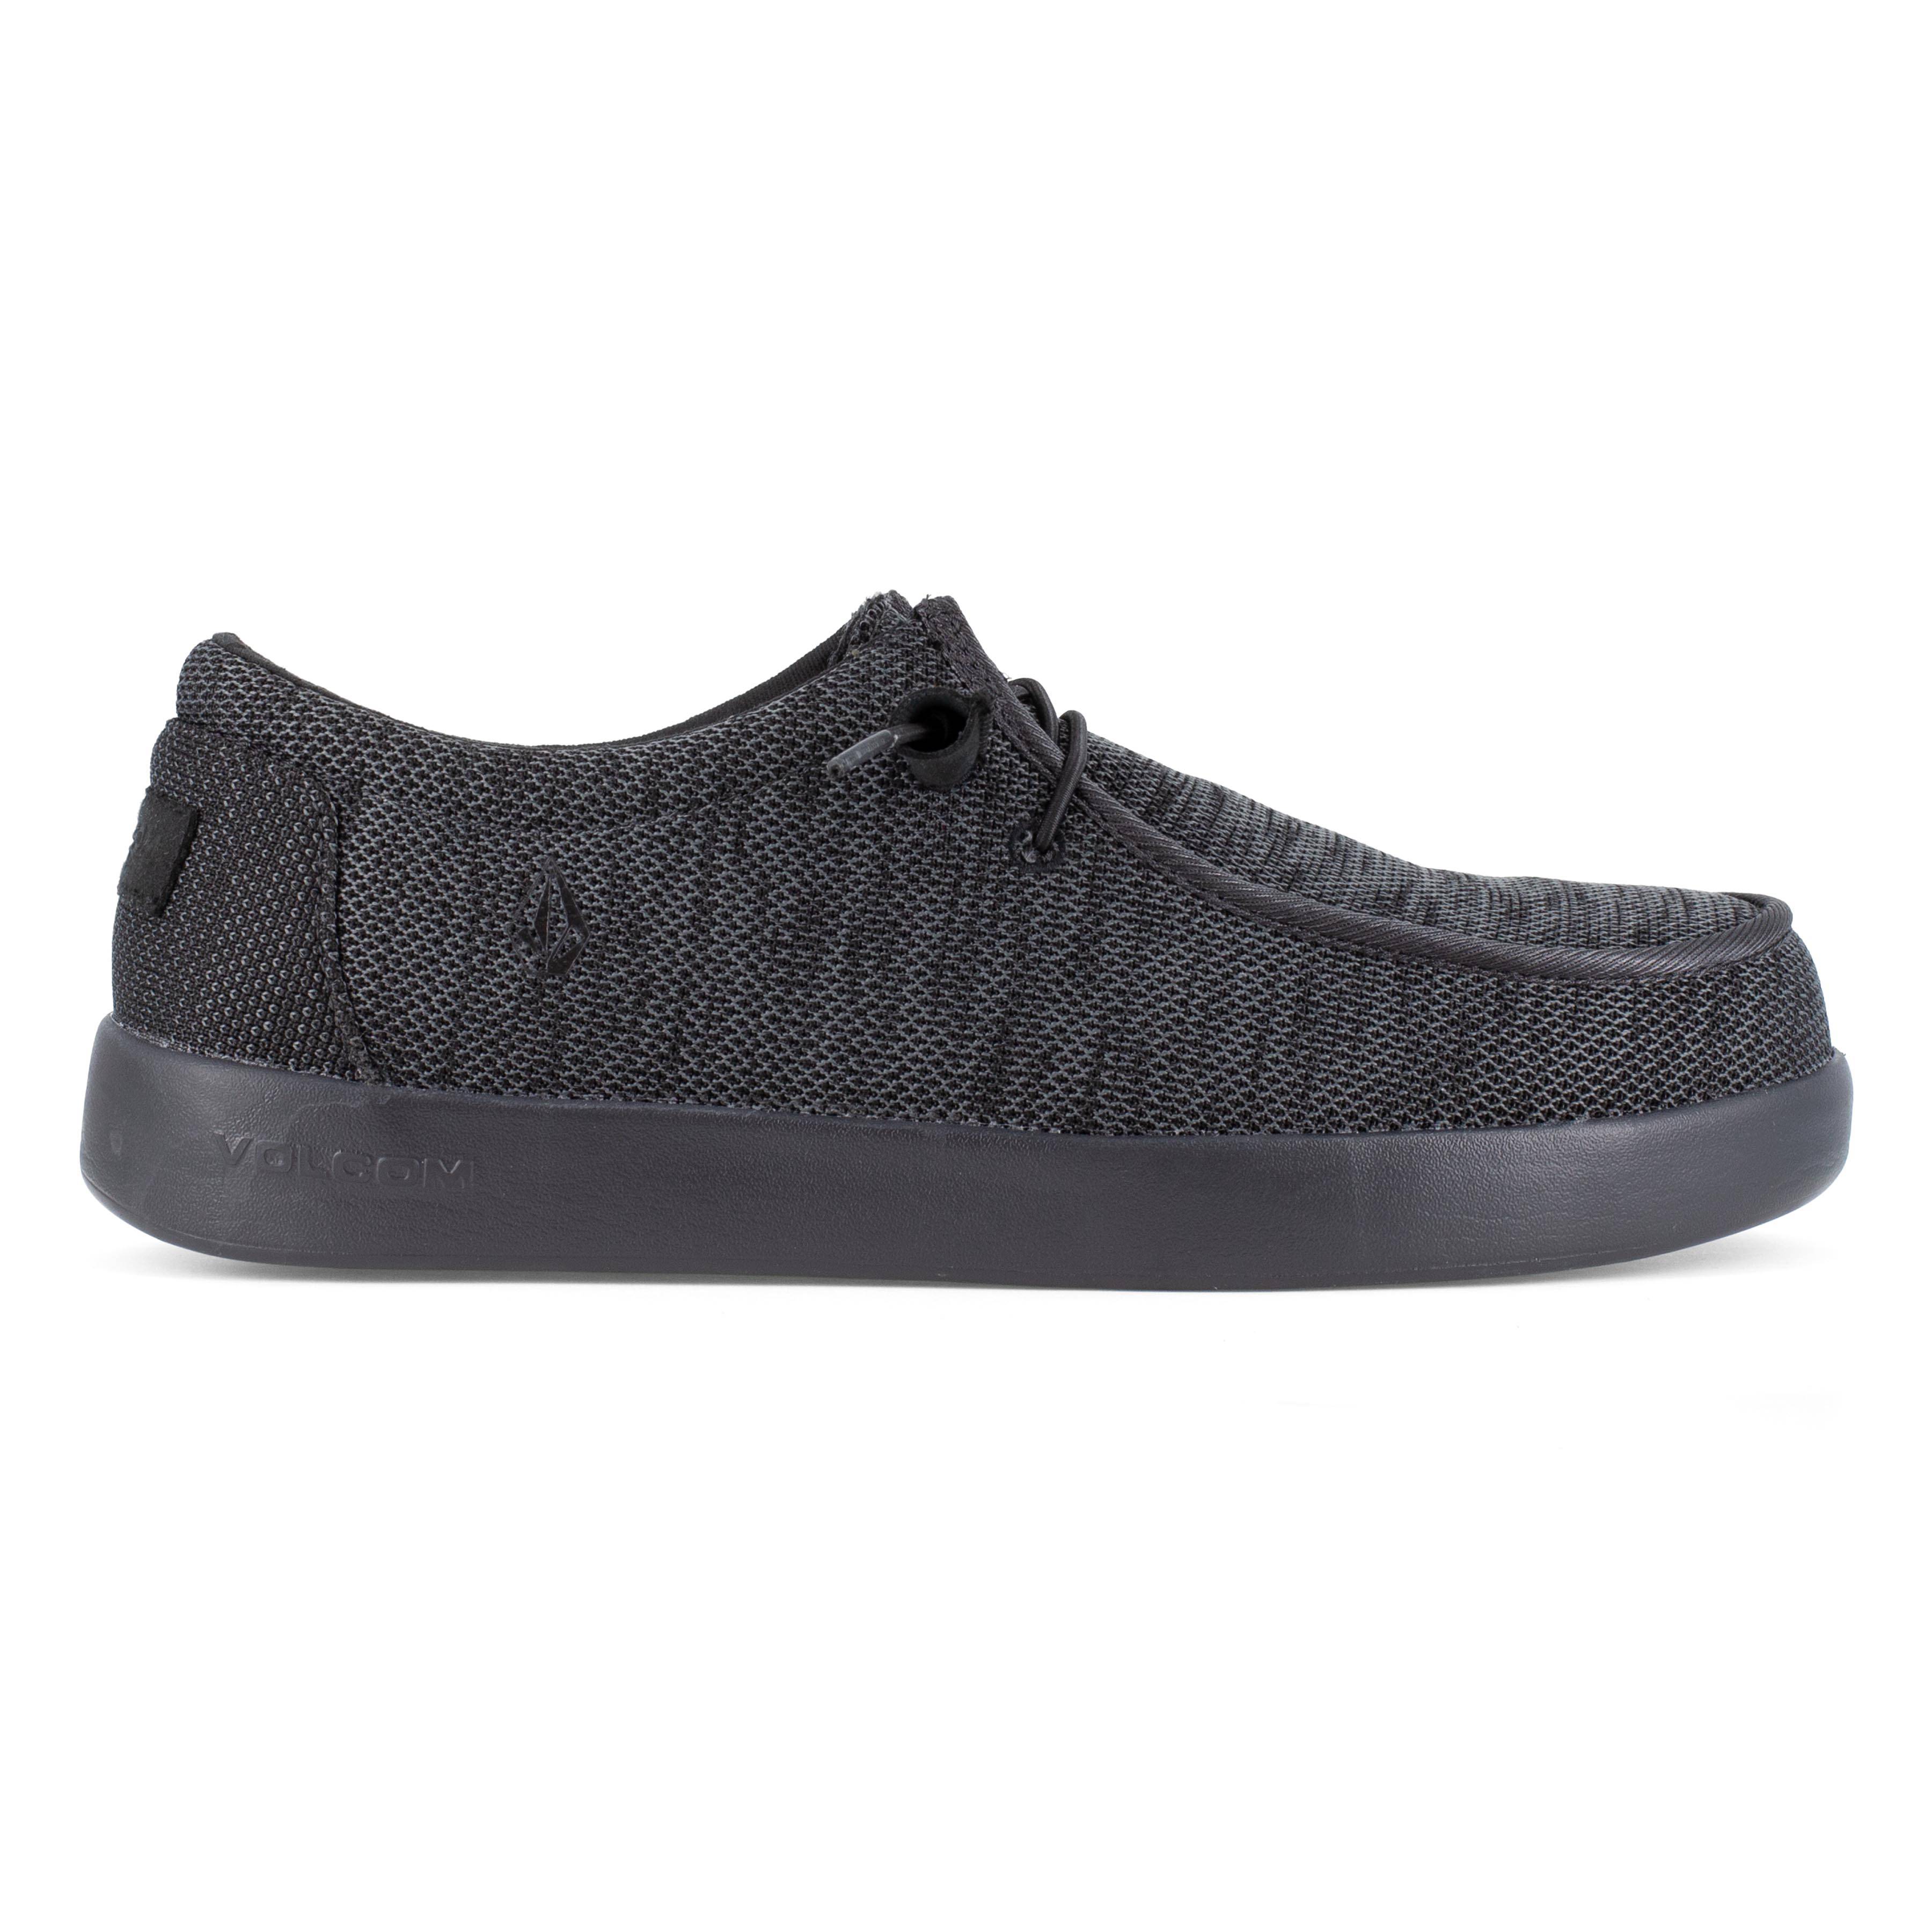 Volcom Workwear Women's Chill Composite Toe Slip-On Shoes